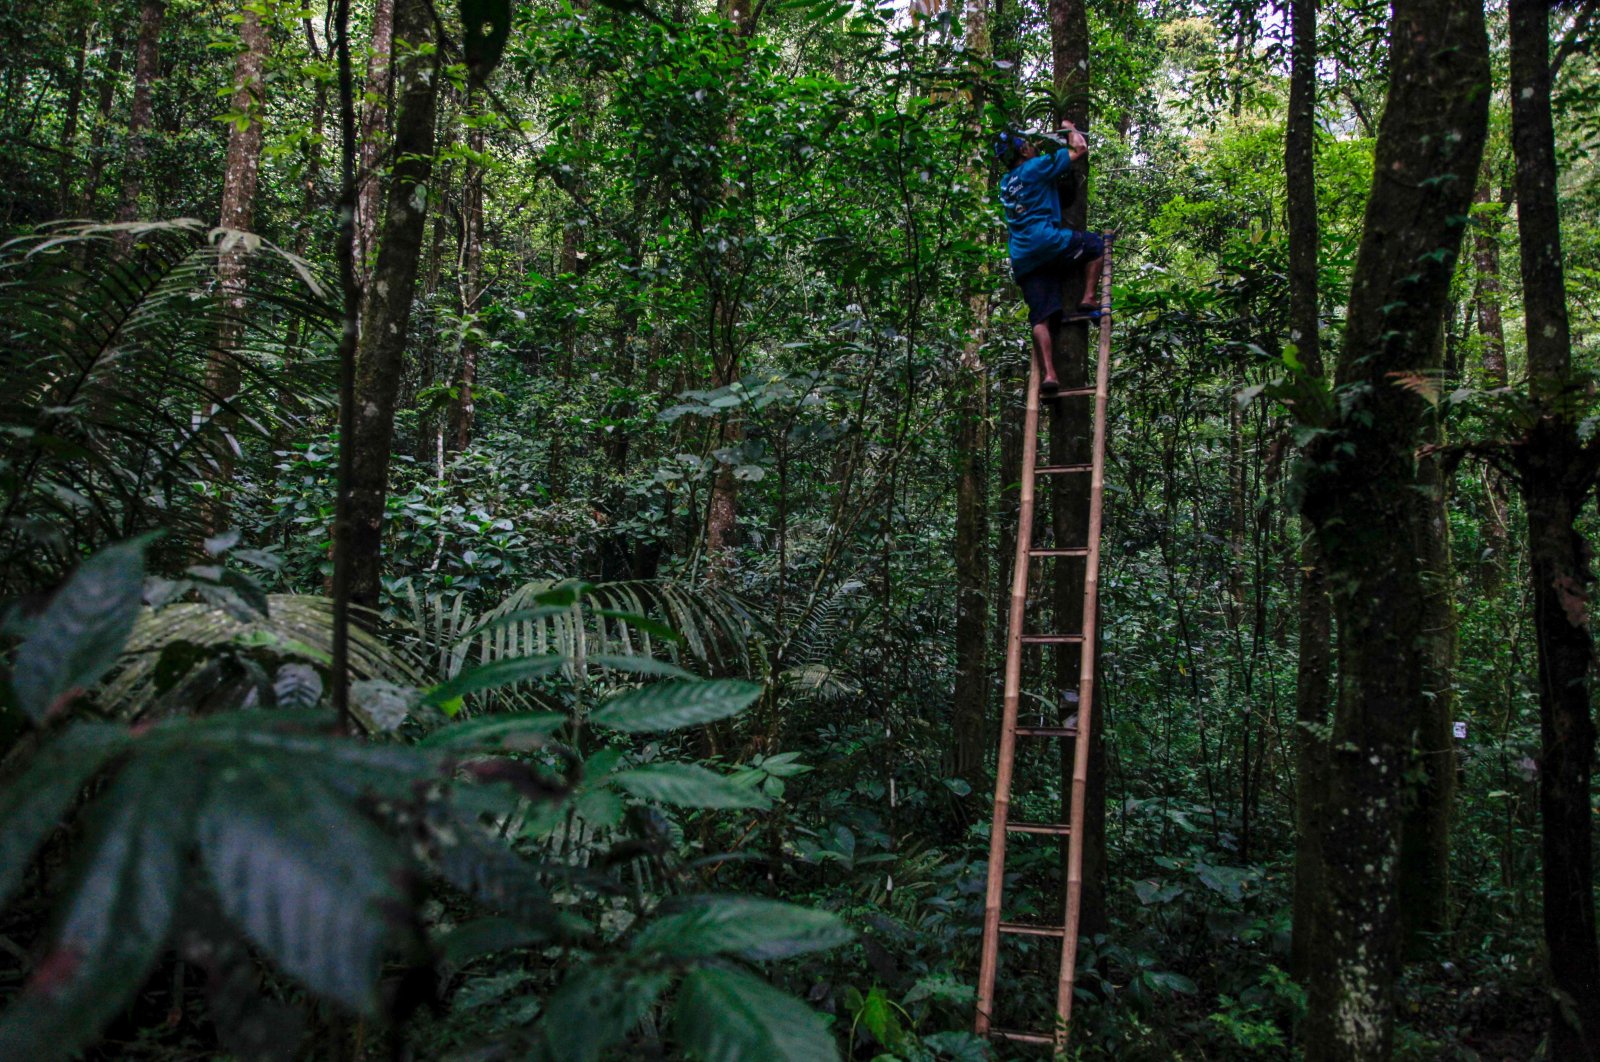 Musimin plants orchids on a tree in the forest at the foot of Mount Merapi in Sleman, Yogyakarta, Indonesia, June 26, 2022. (AFP Photo)